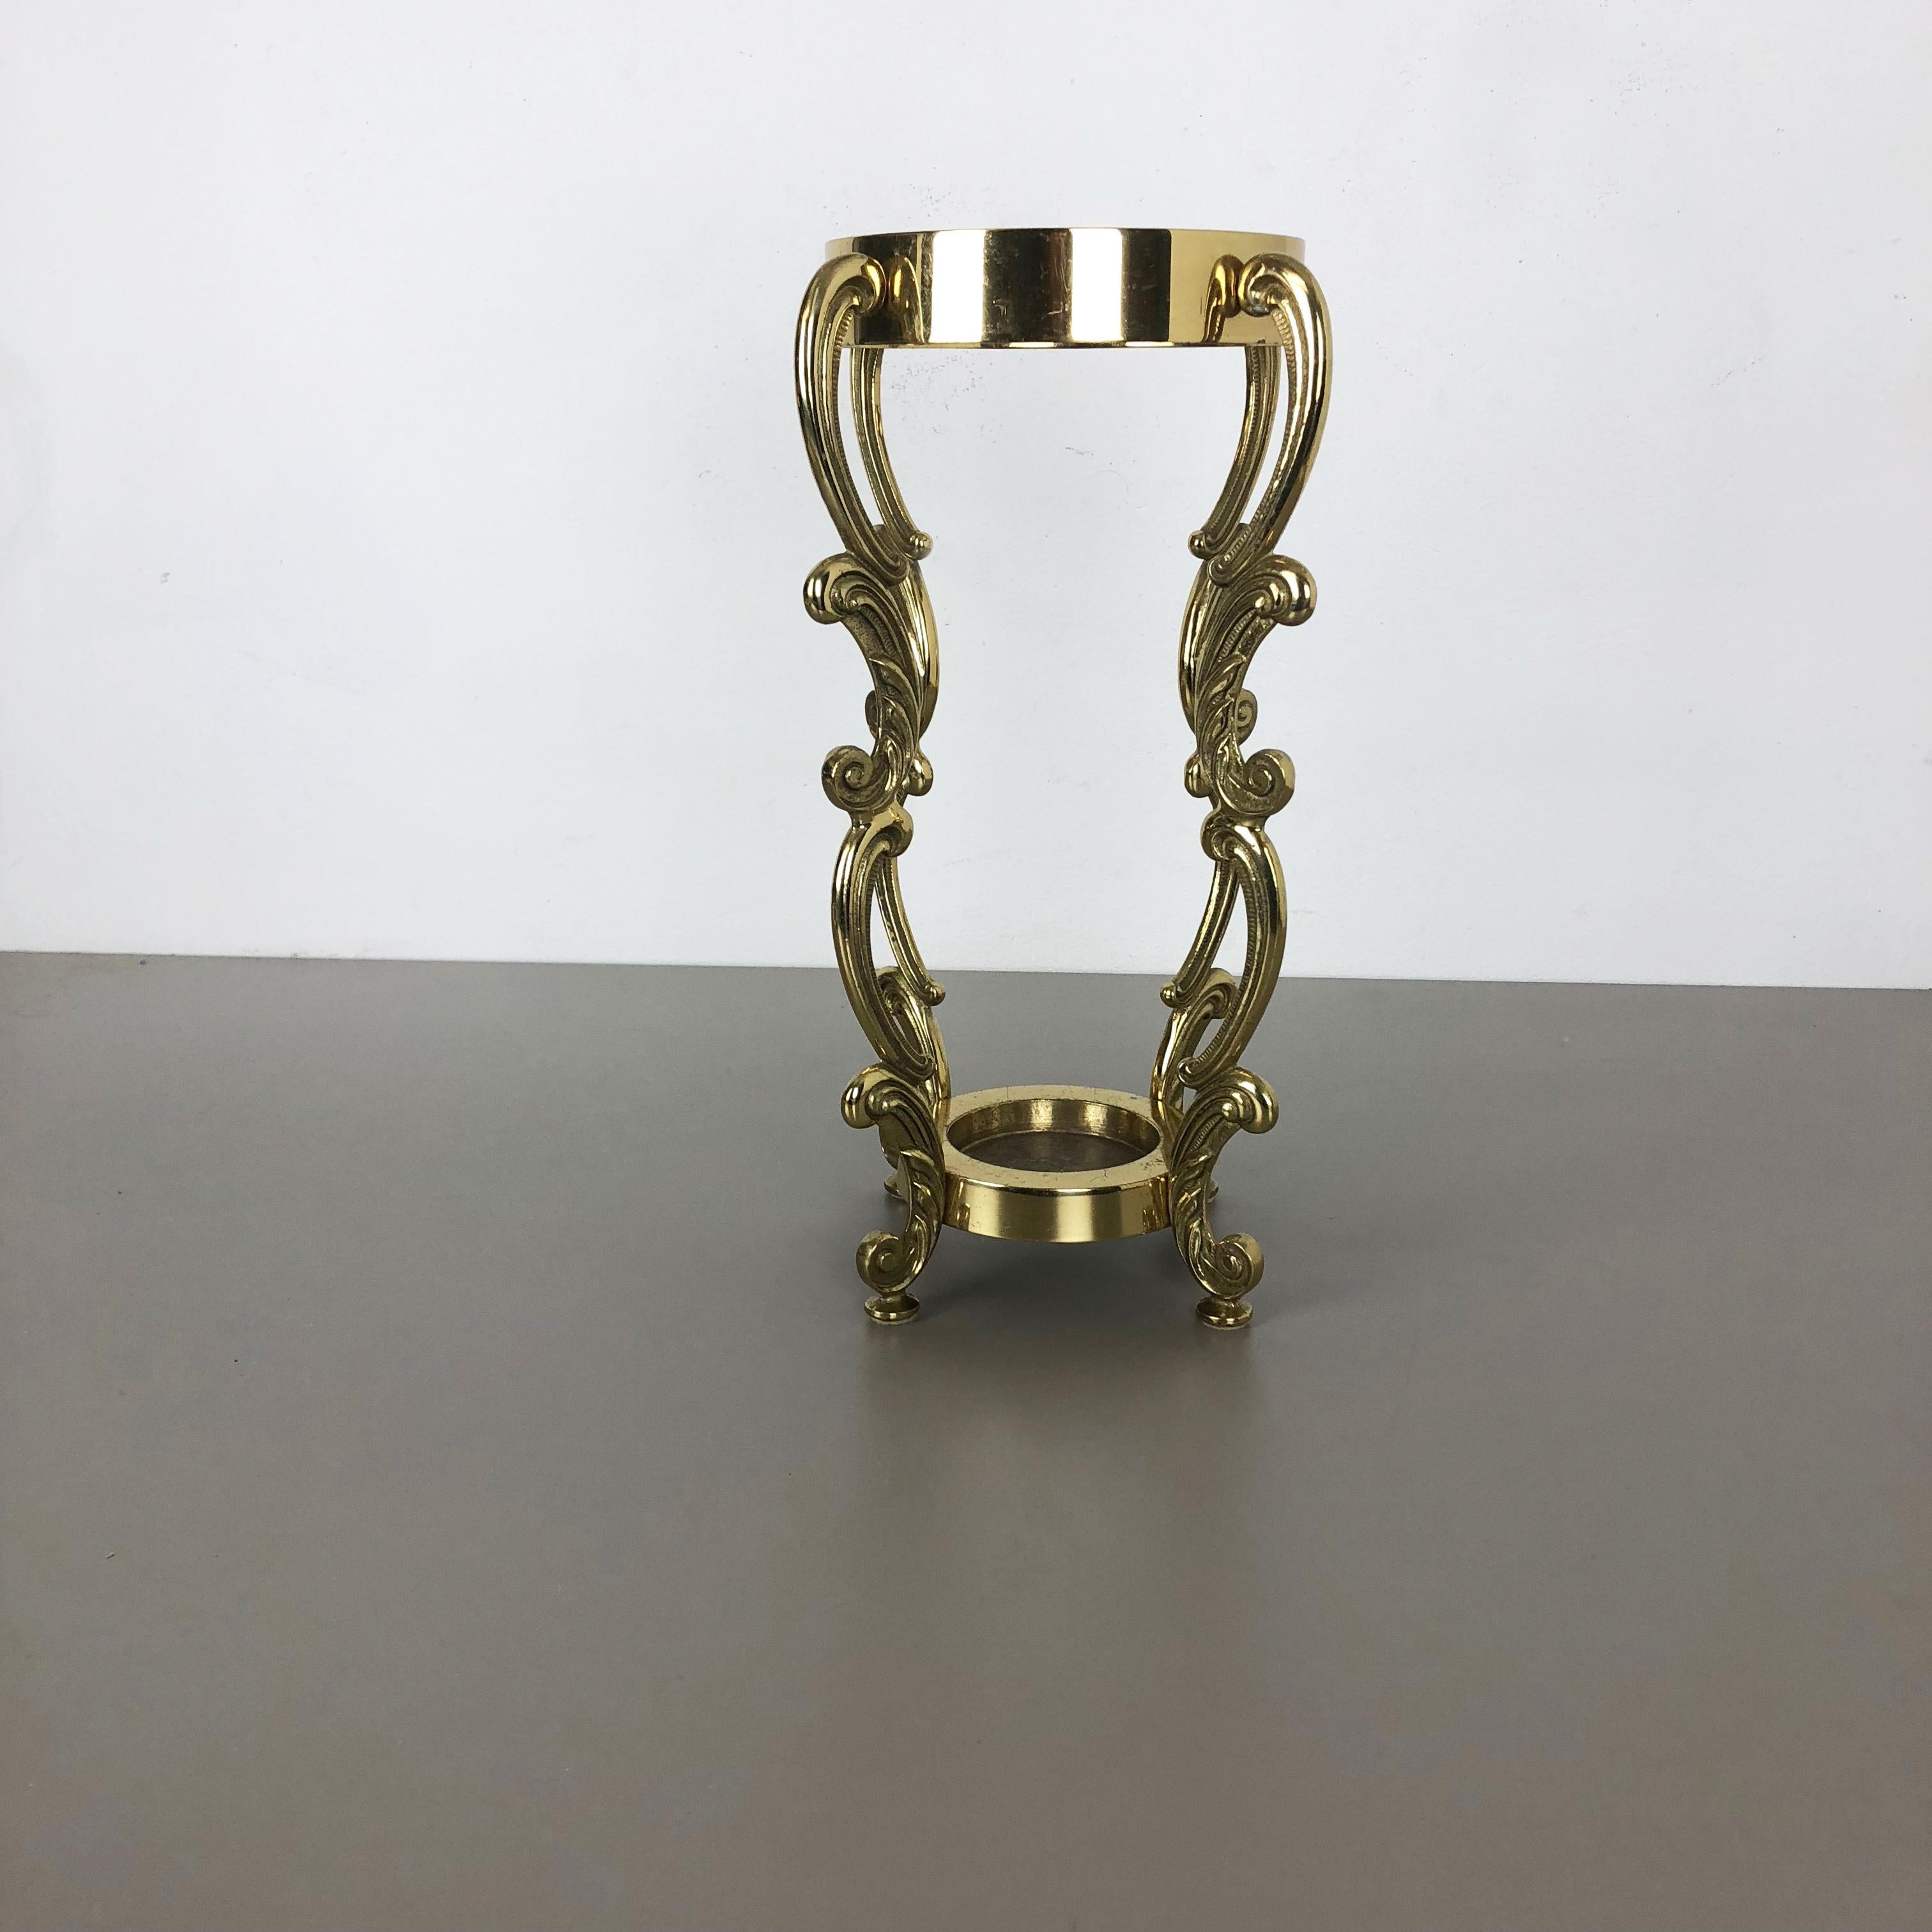 Bauhaus Original Hollywood Regency Solid Brass Umbrella Stand, Italy, 1970s For Sale